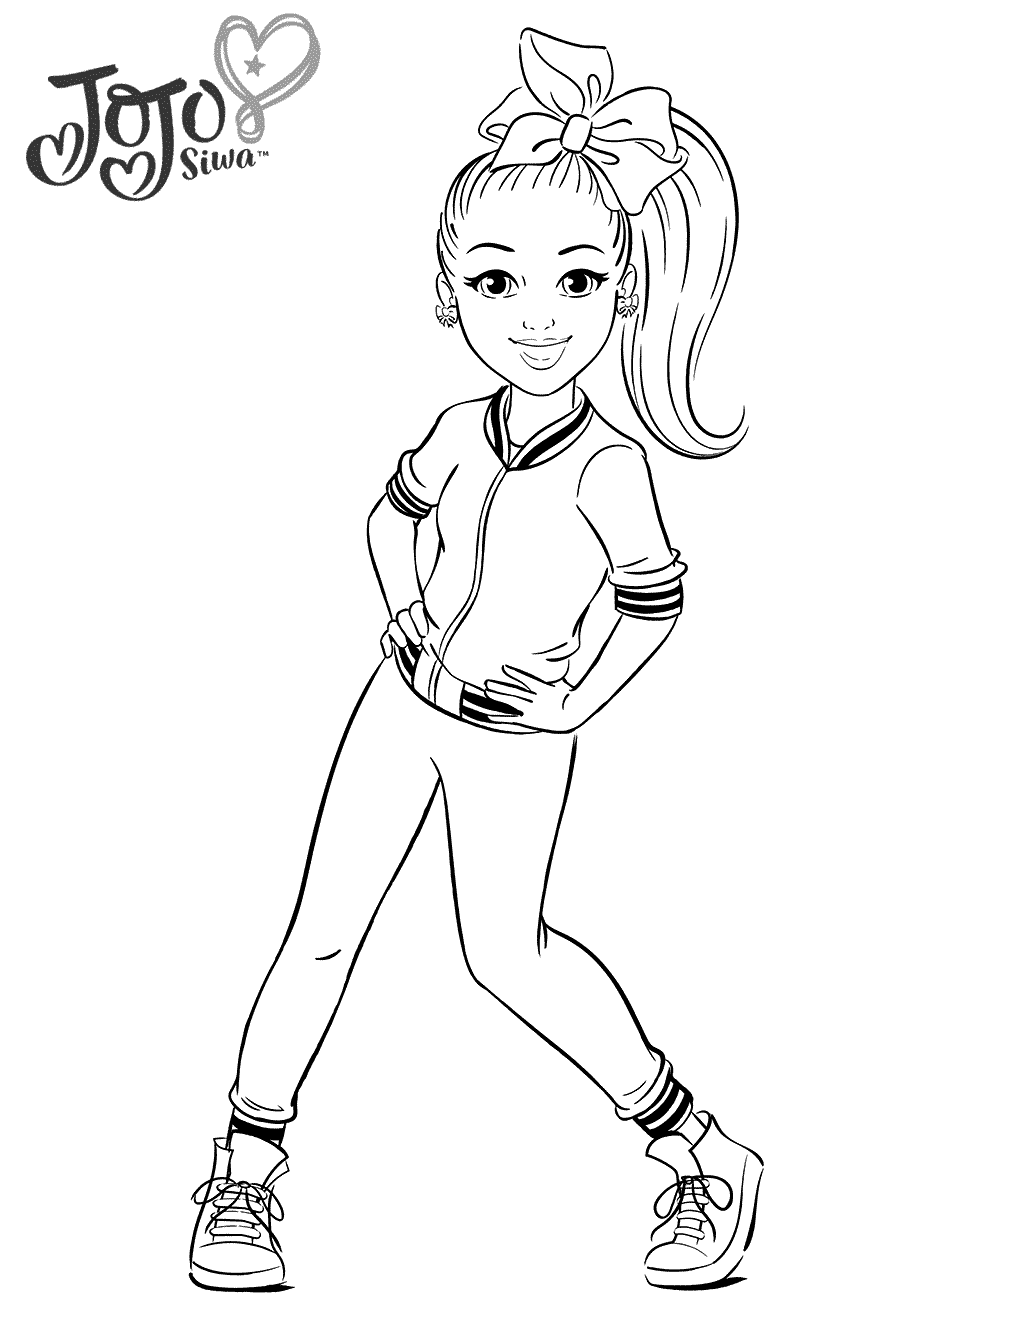 Jojo siwa coloring pages printable for free download